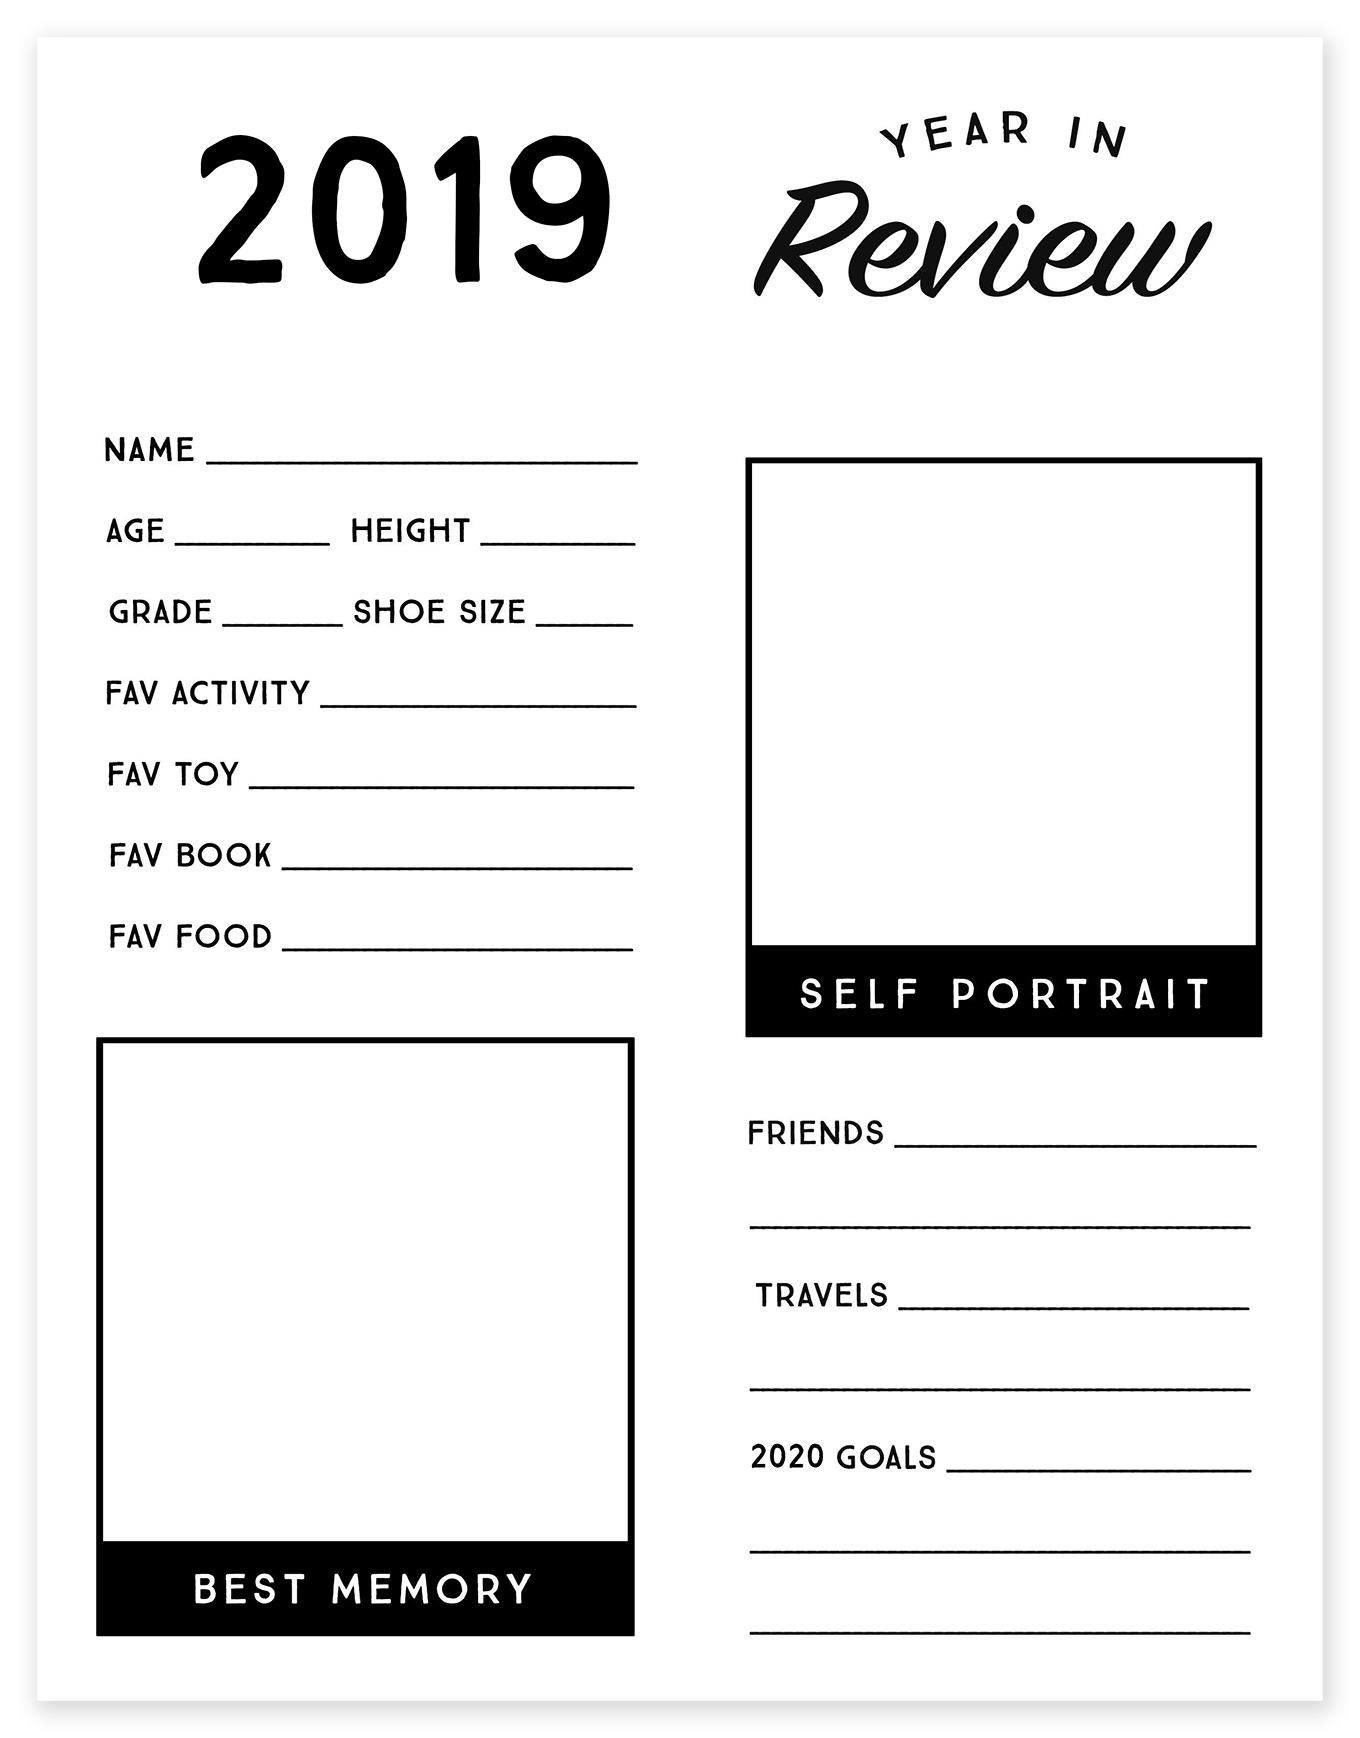 year-in-review-printable